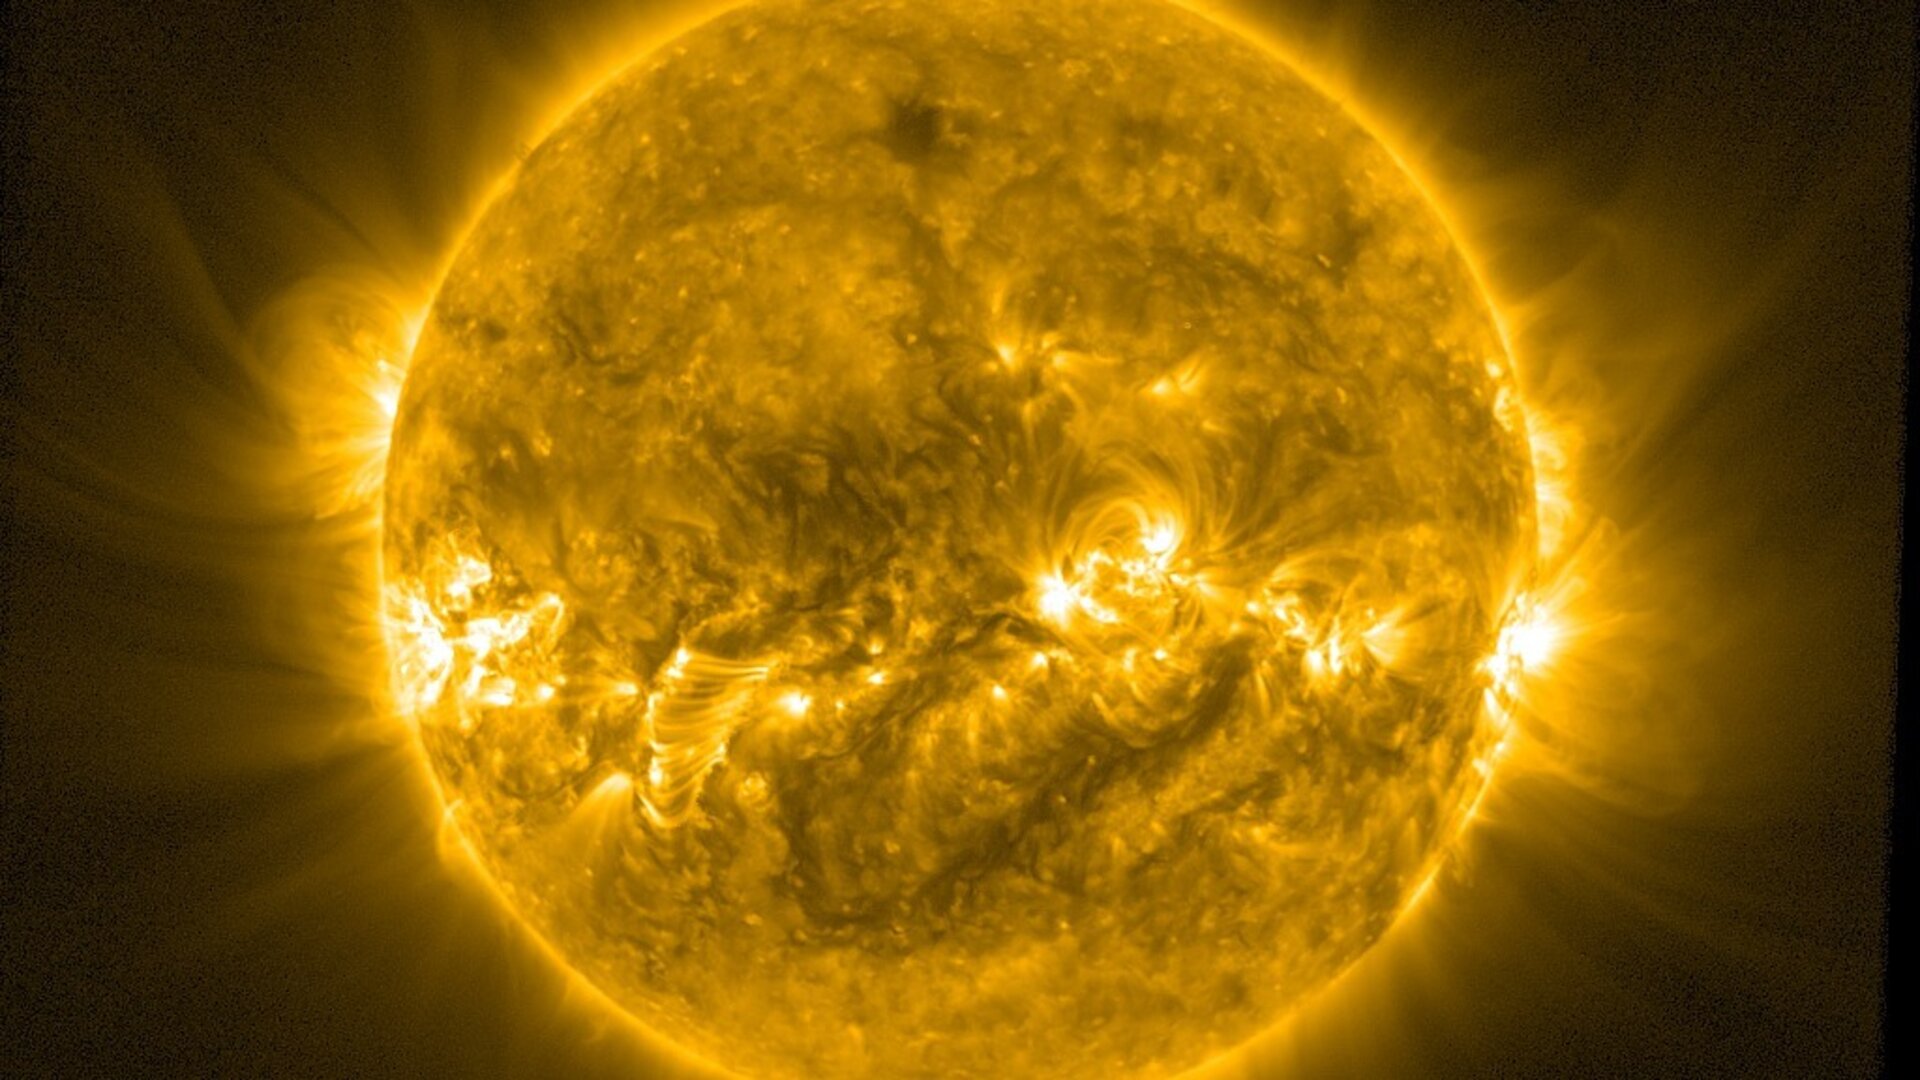 The Sun during a solar flare causing extra radiation